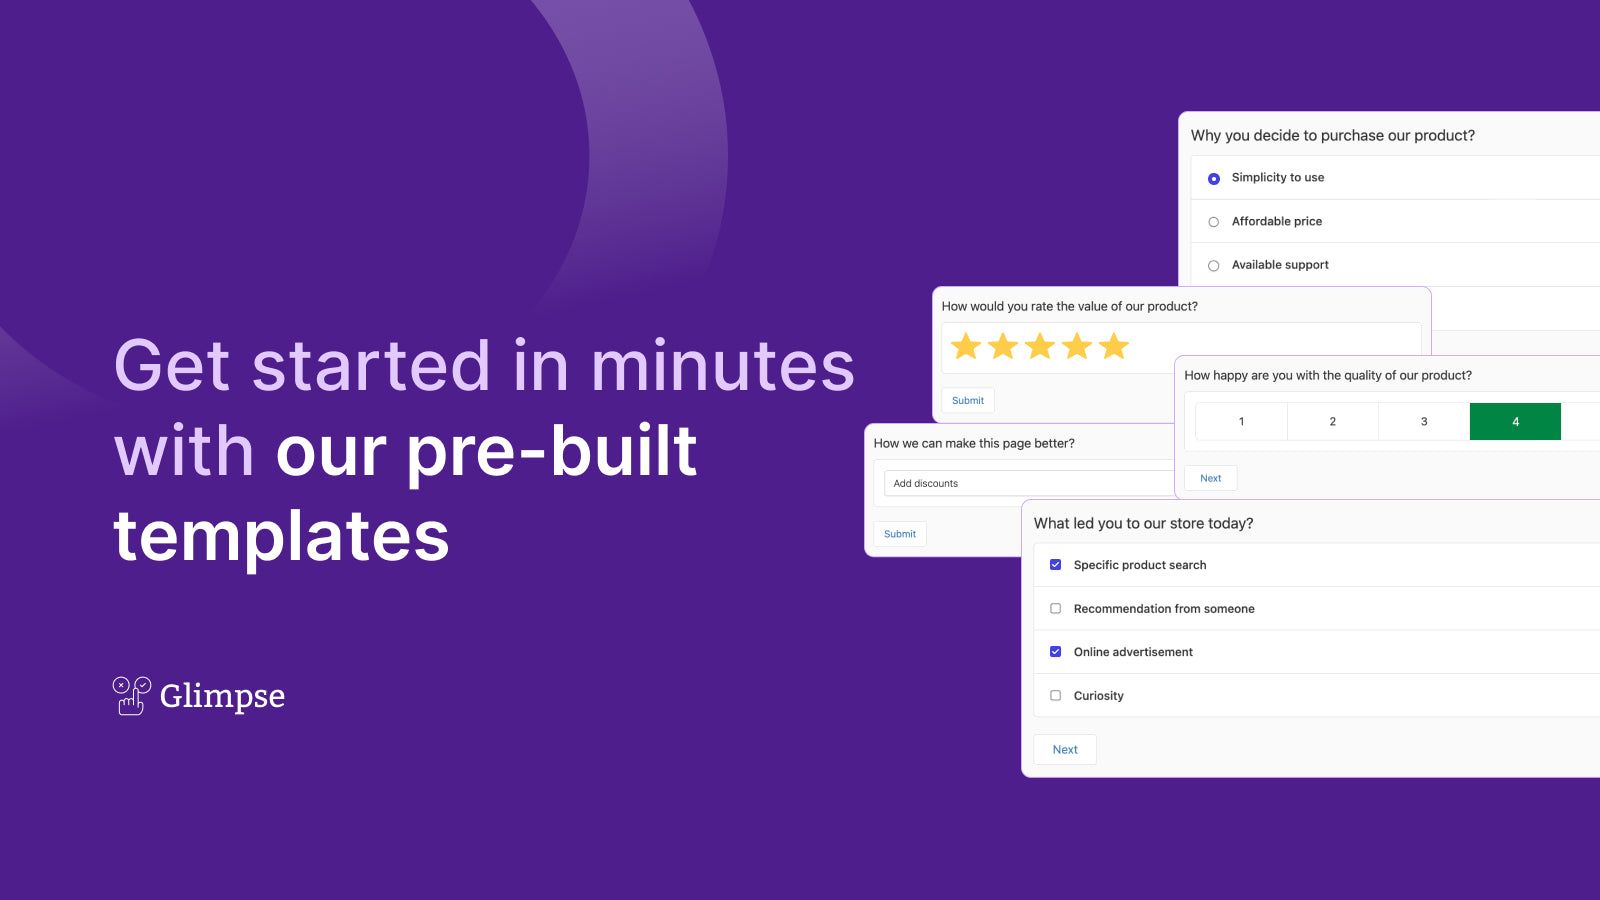 Get started in minutes with our pre-built templates